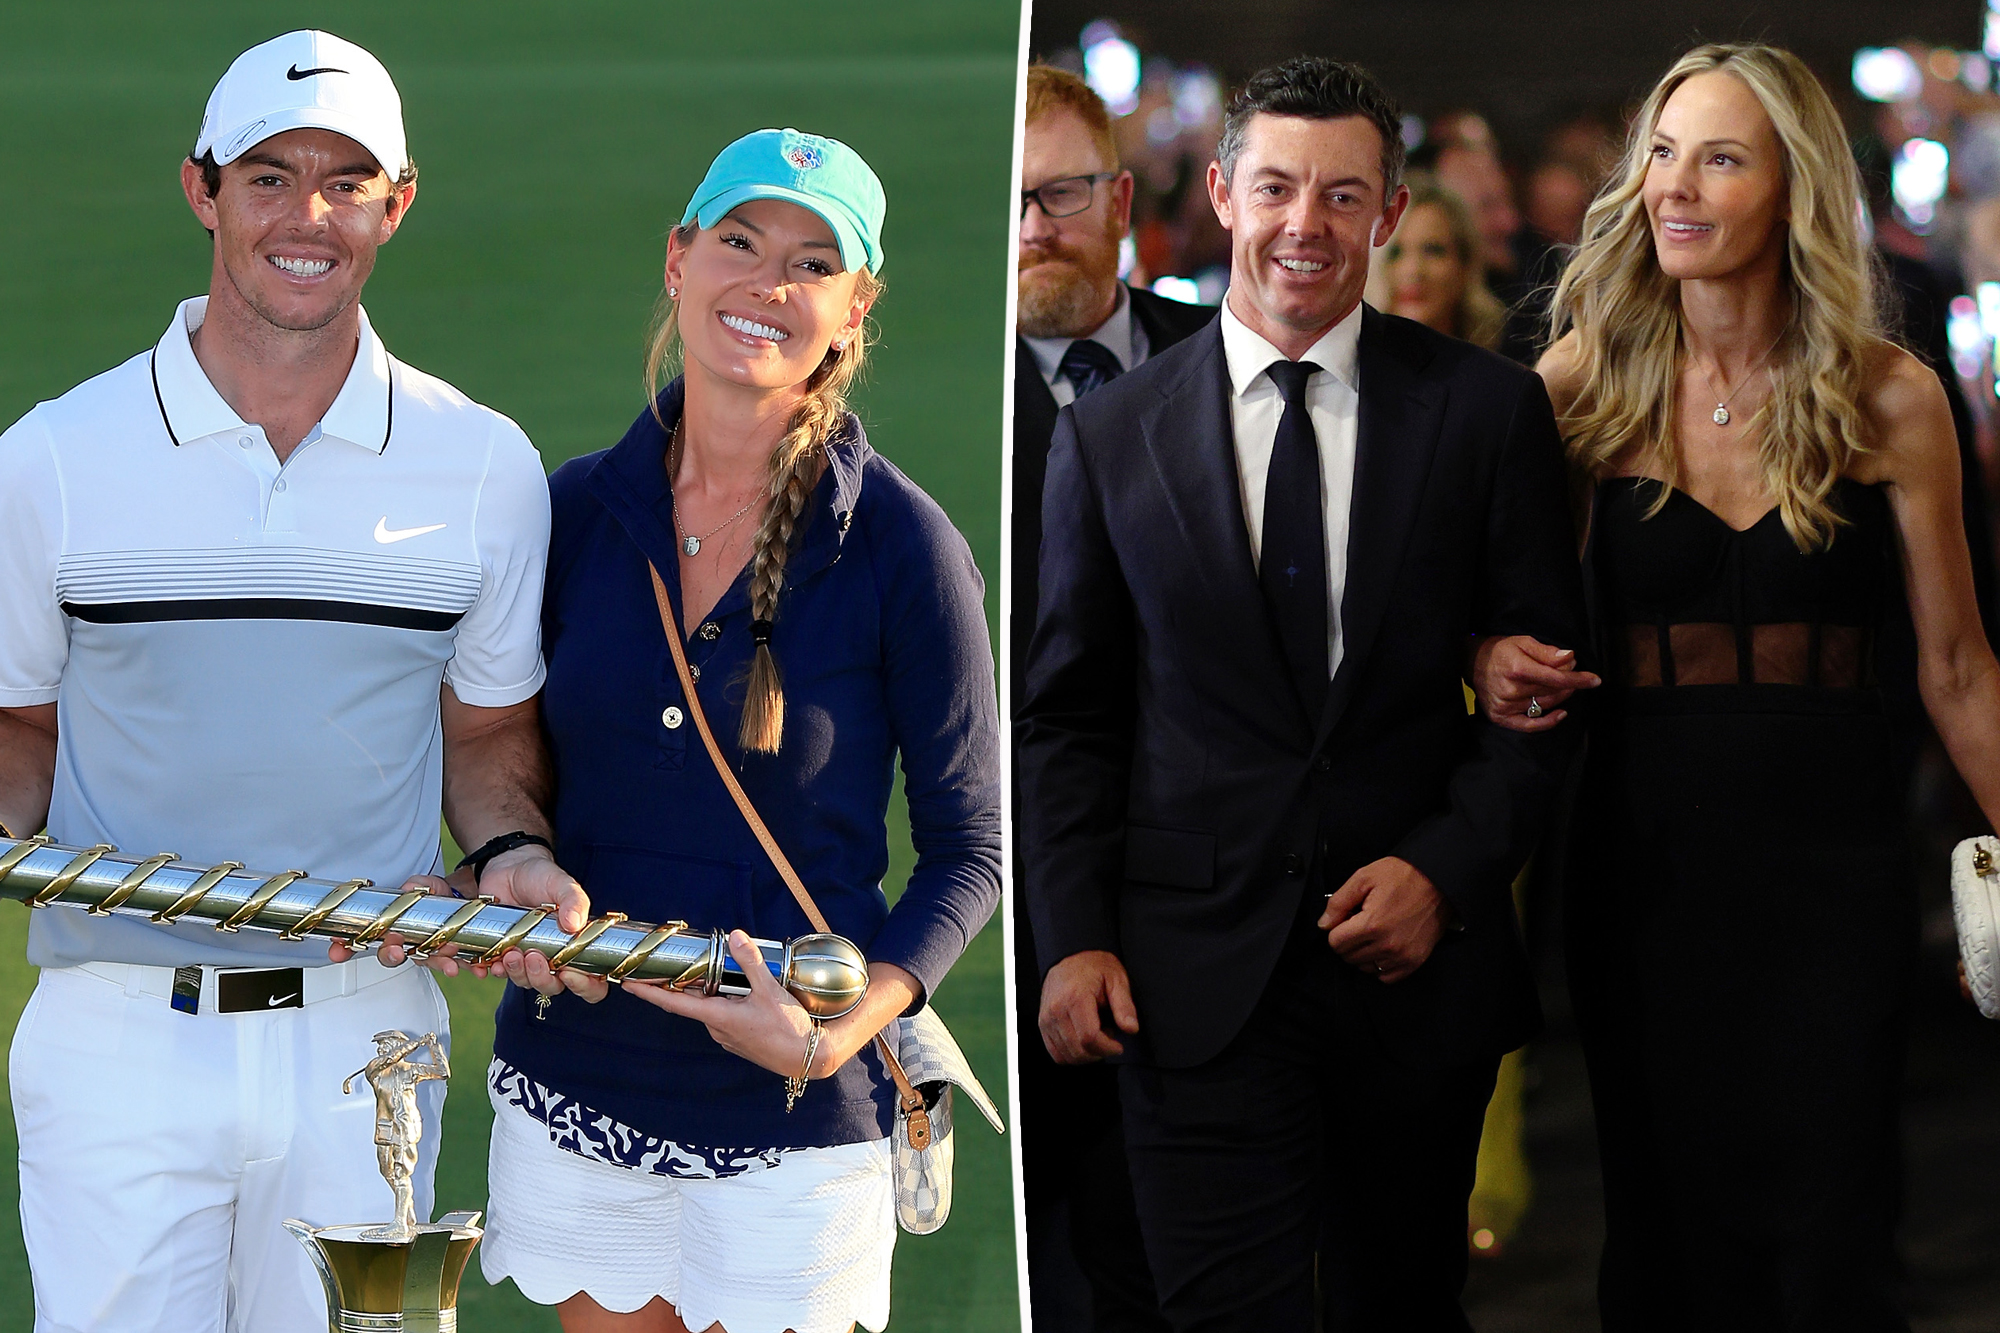 Rory McIlroy and Erica Stoll Reconcile: A Story of Love Prevailing